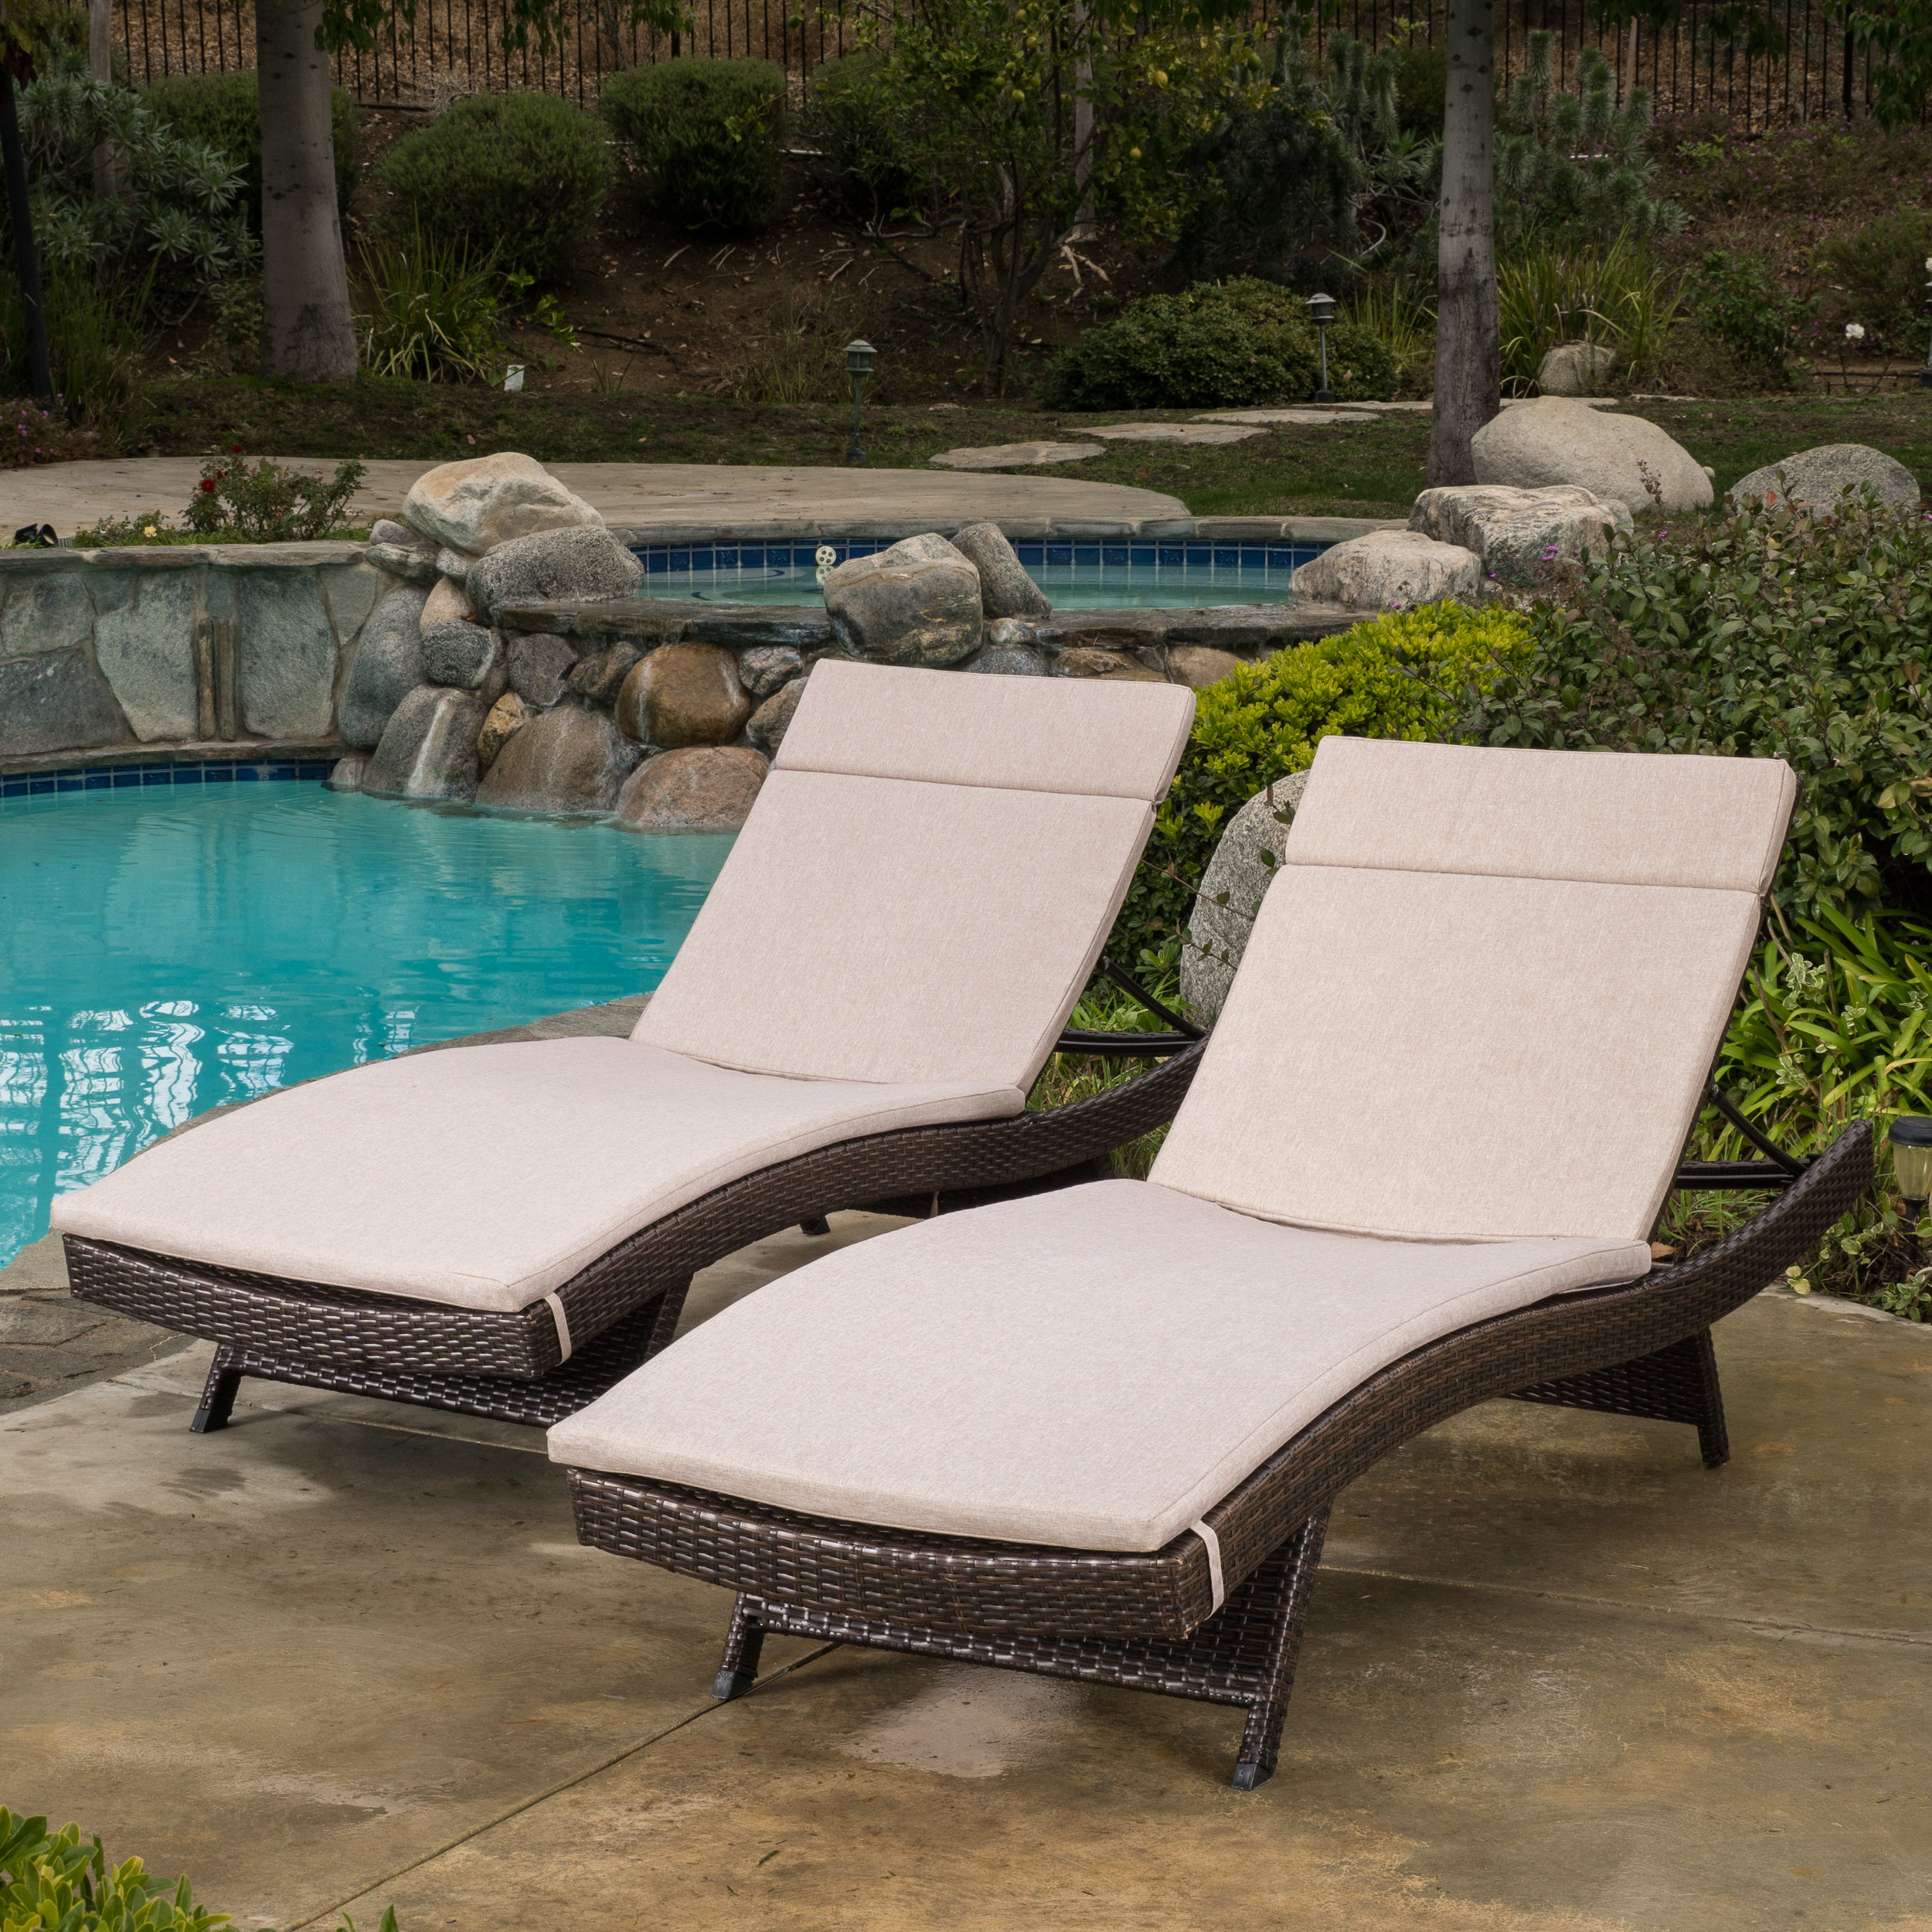 Lakeport Outdoor Adjustable Chaise Lounge Chairs With Cushions (set Of 2) - Textured Beige Cushion